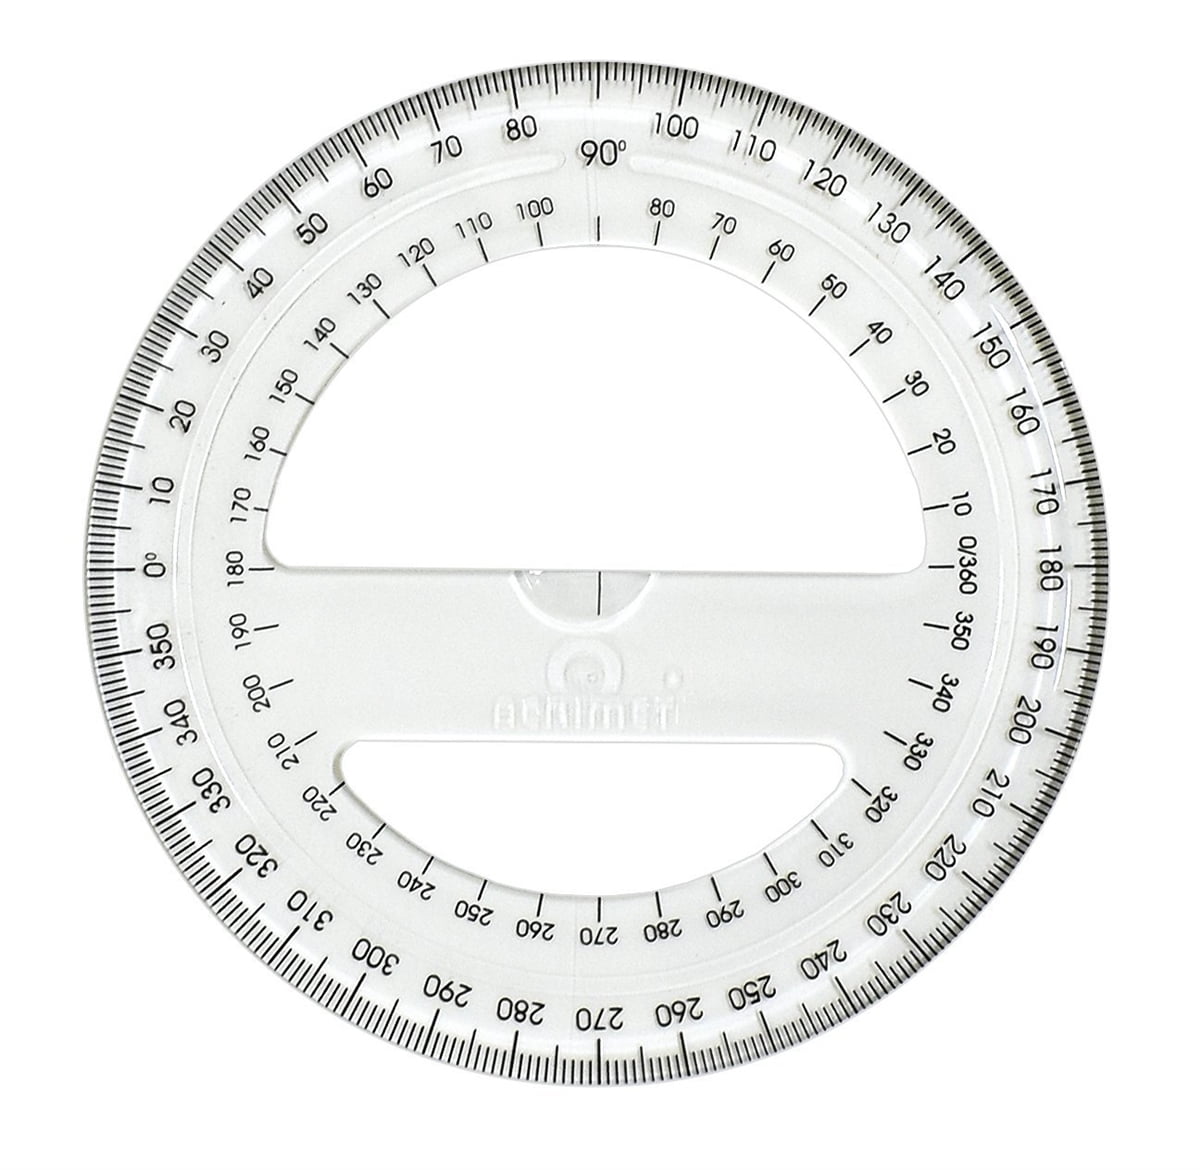 Angle Ruler Rotation 360 Degree Measurement Ruler Protractor Office Supplies 1PCS Cost-effective and Good Quality Practical Processed